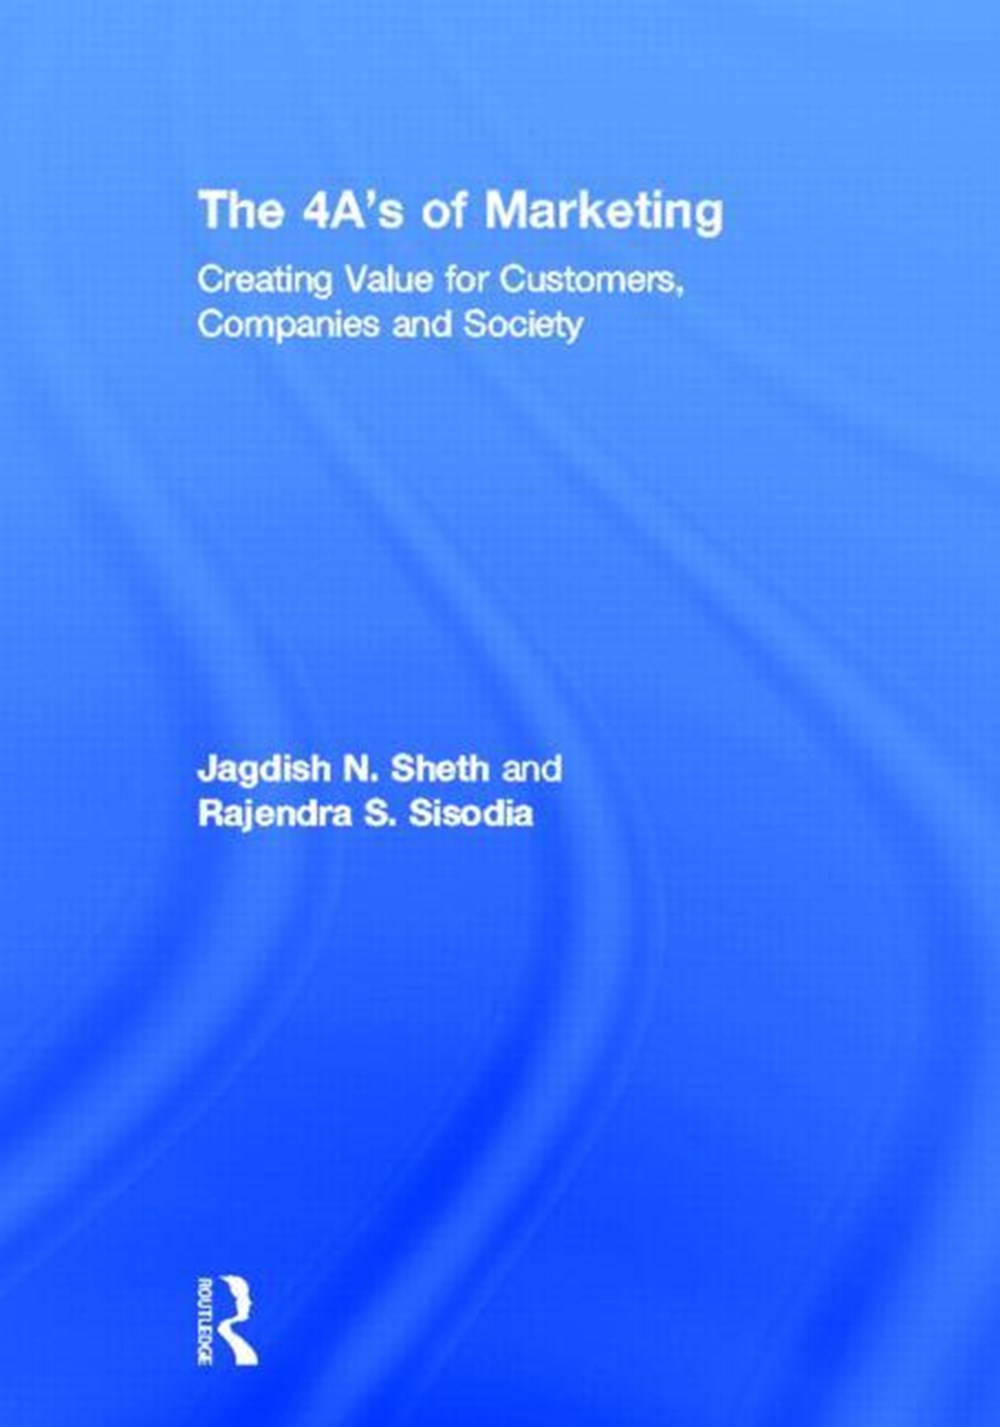 4 A's of Marketing: Creating Value for Customer, Company and Society